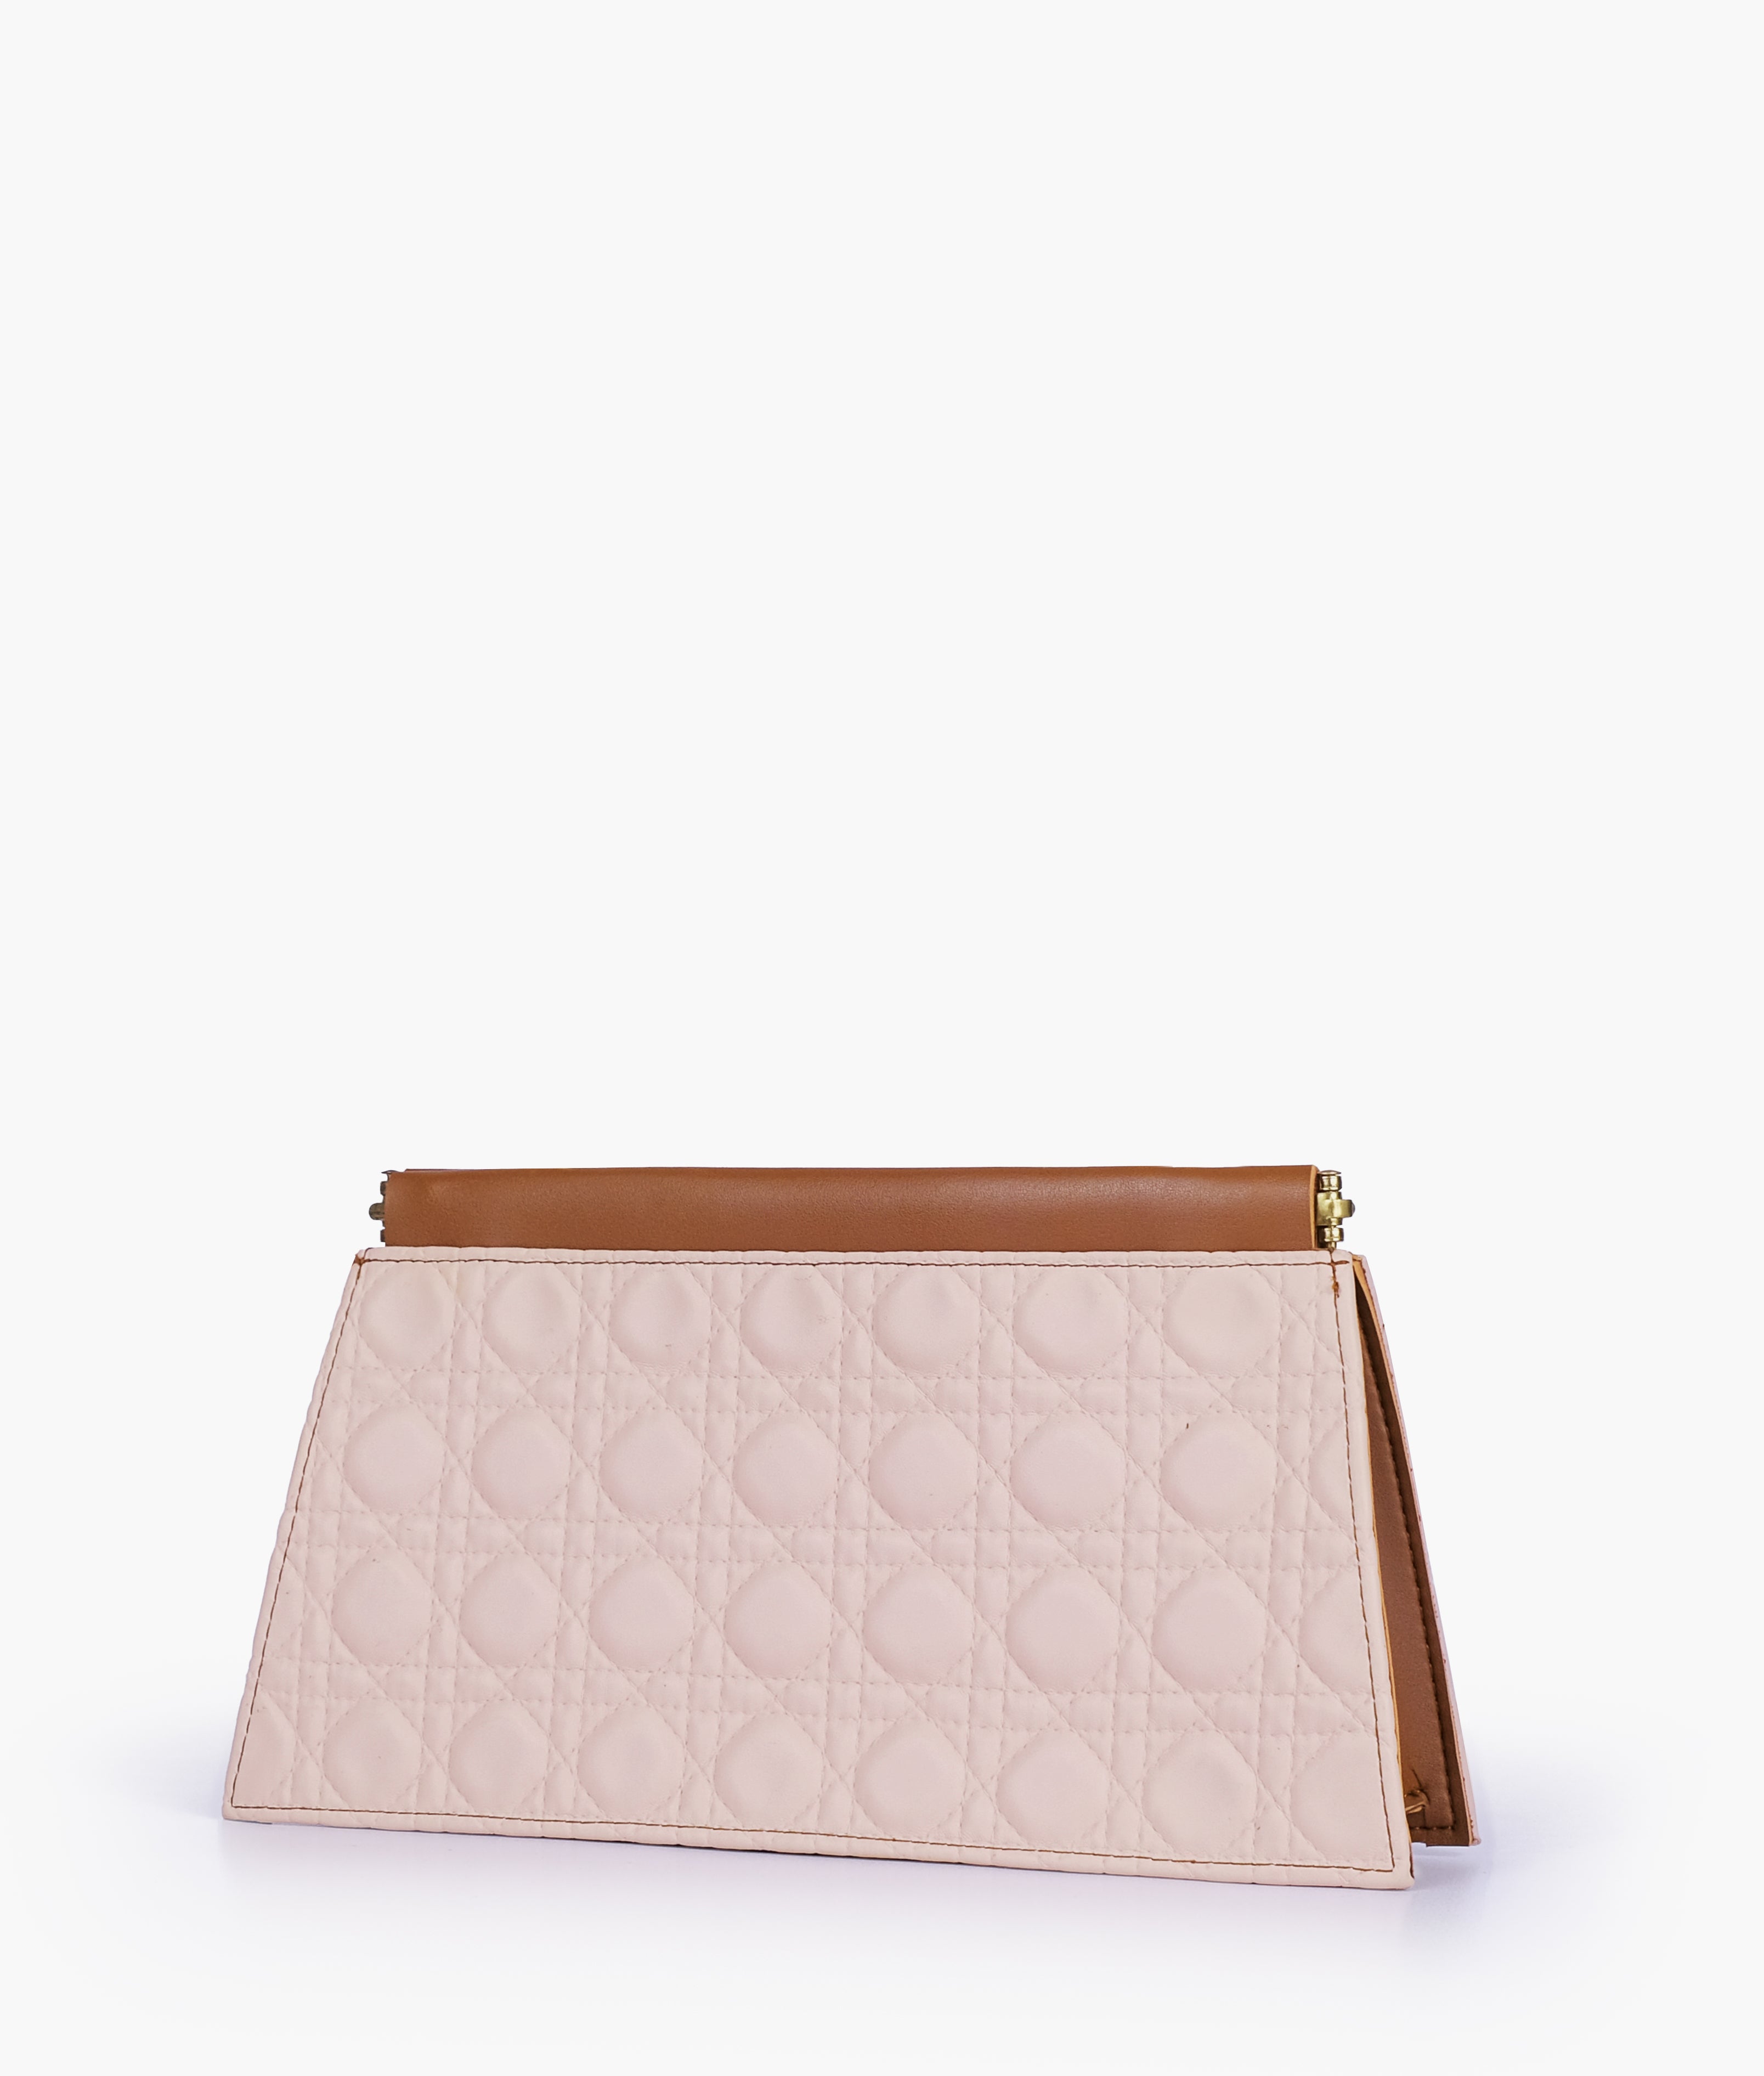 Brown quilted evening clutch with snap closure